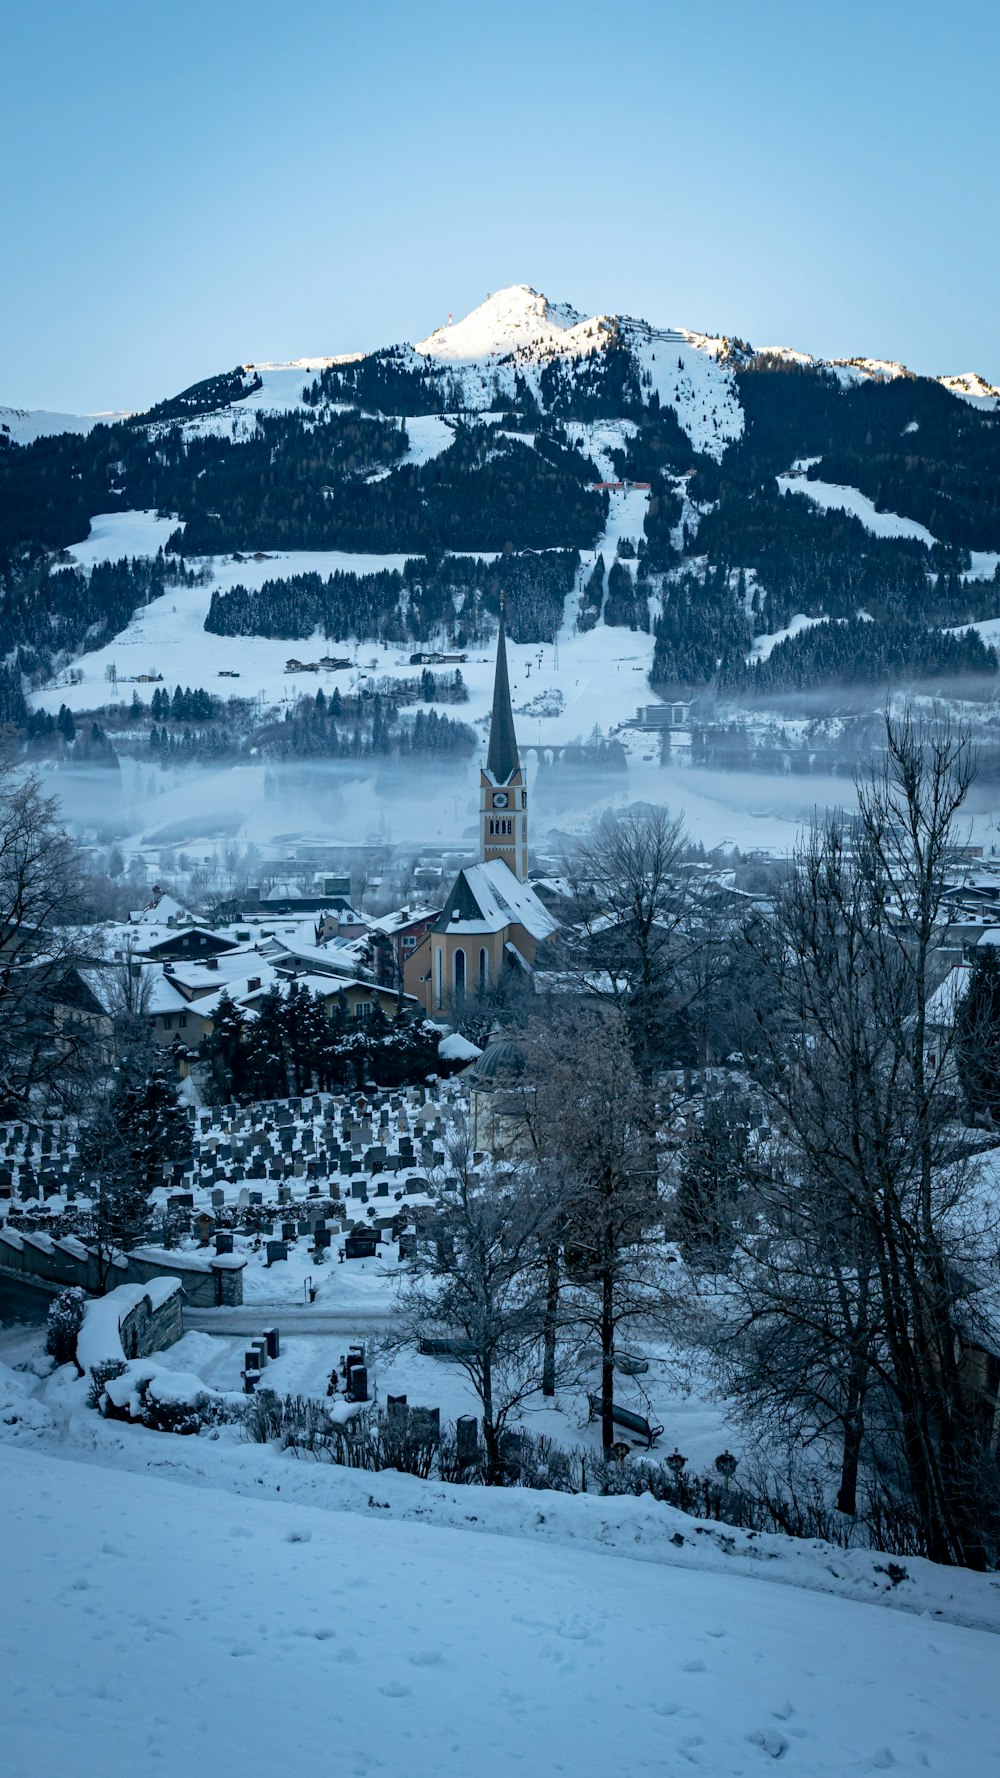 a snowy mountain with a church in the foreground